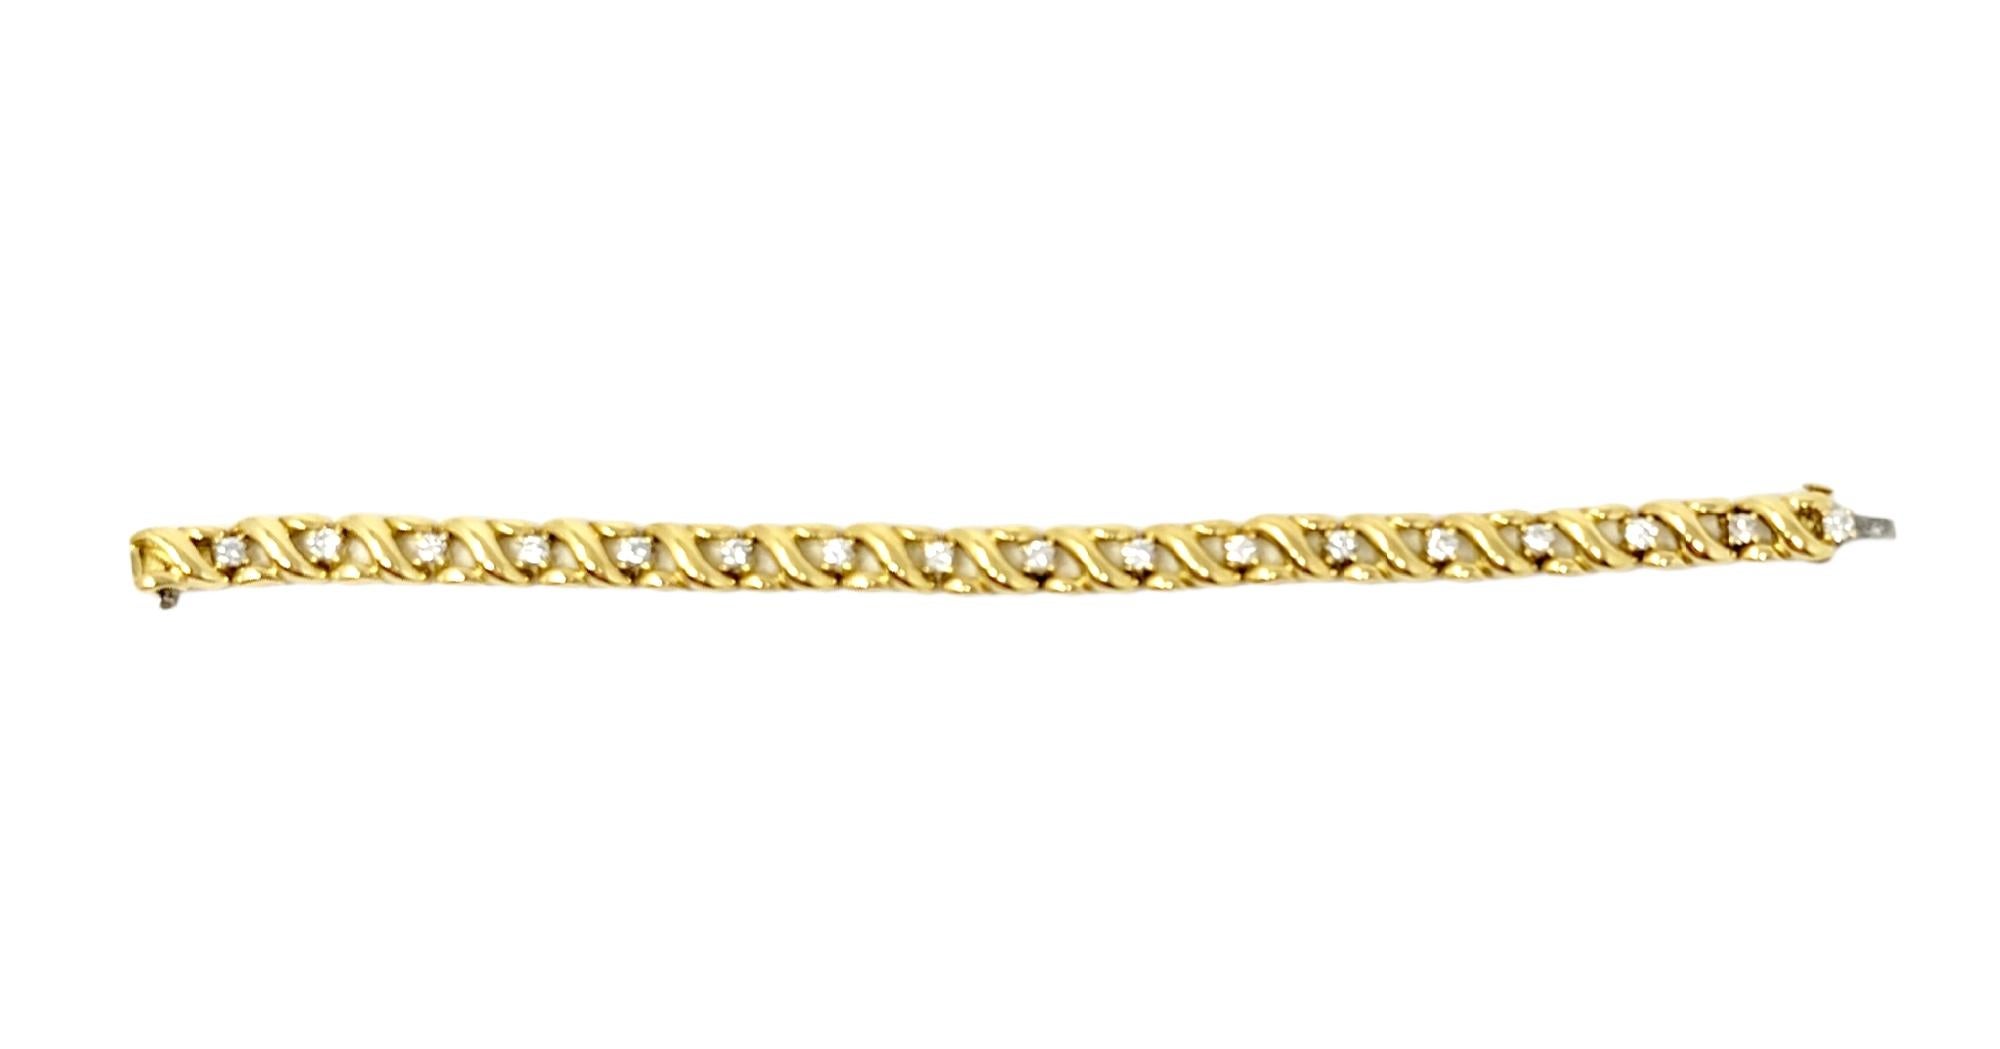 Diamond and Ribbon Motif Link Bracelet 18 Karat Yellow Gold 2.02 Carats Total In Good Condition For Sale In Scottsdale, AZ